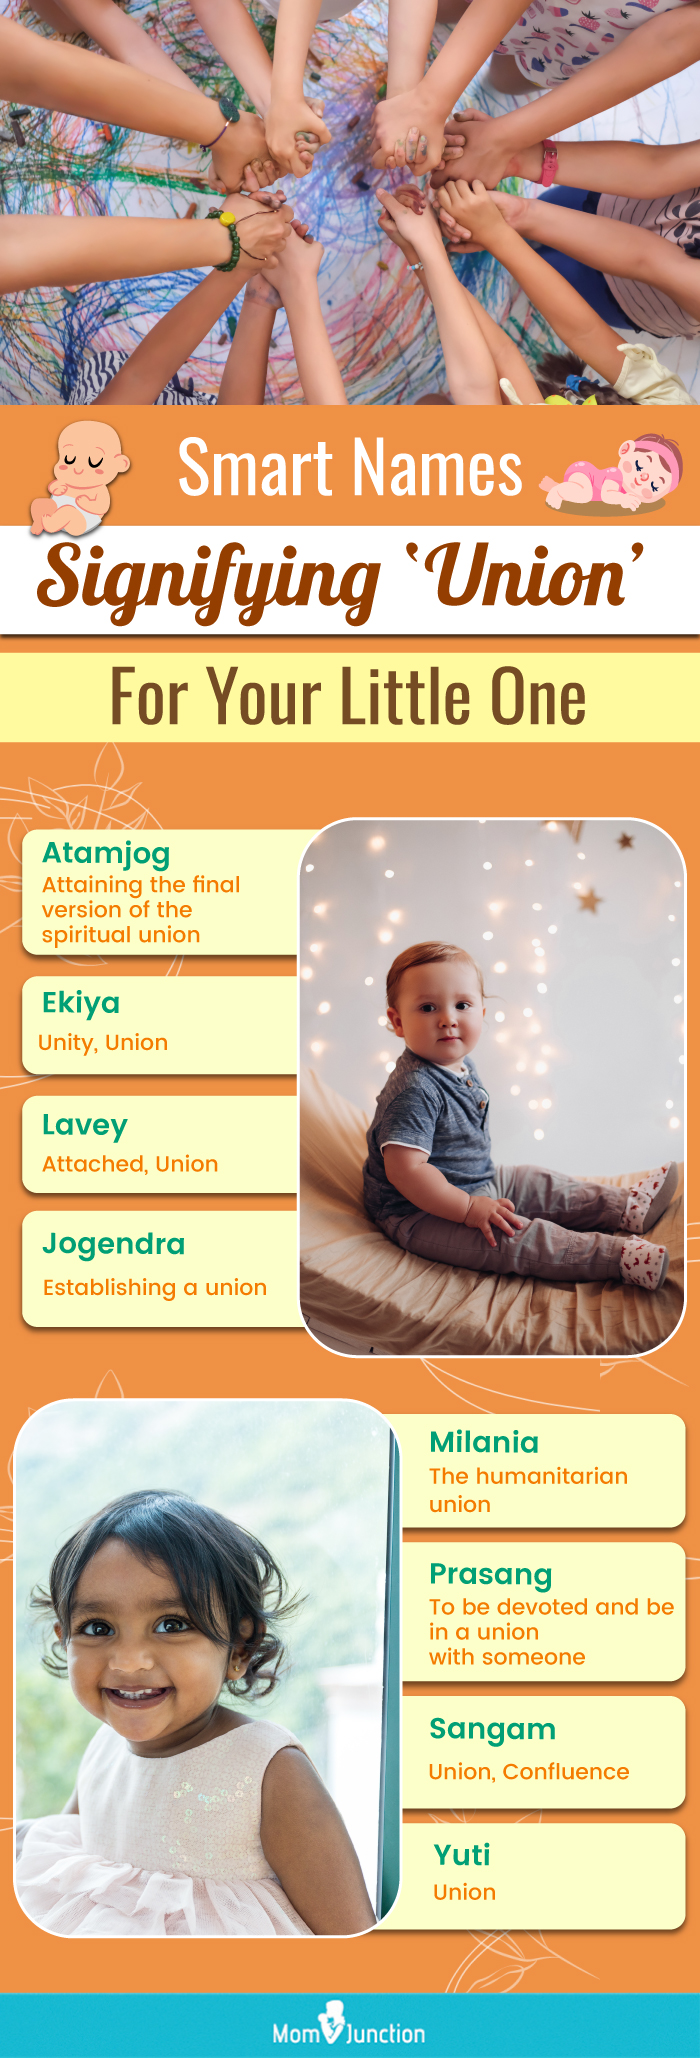 smart names signifying union for your little one (infographic)